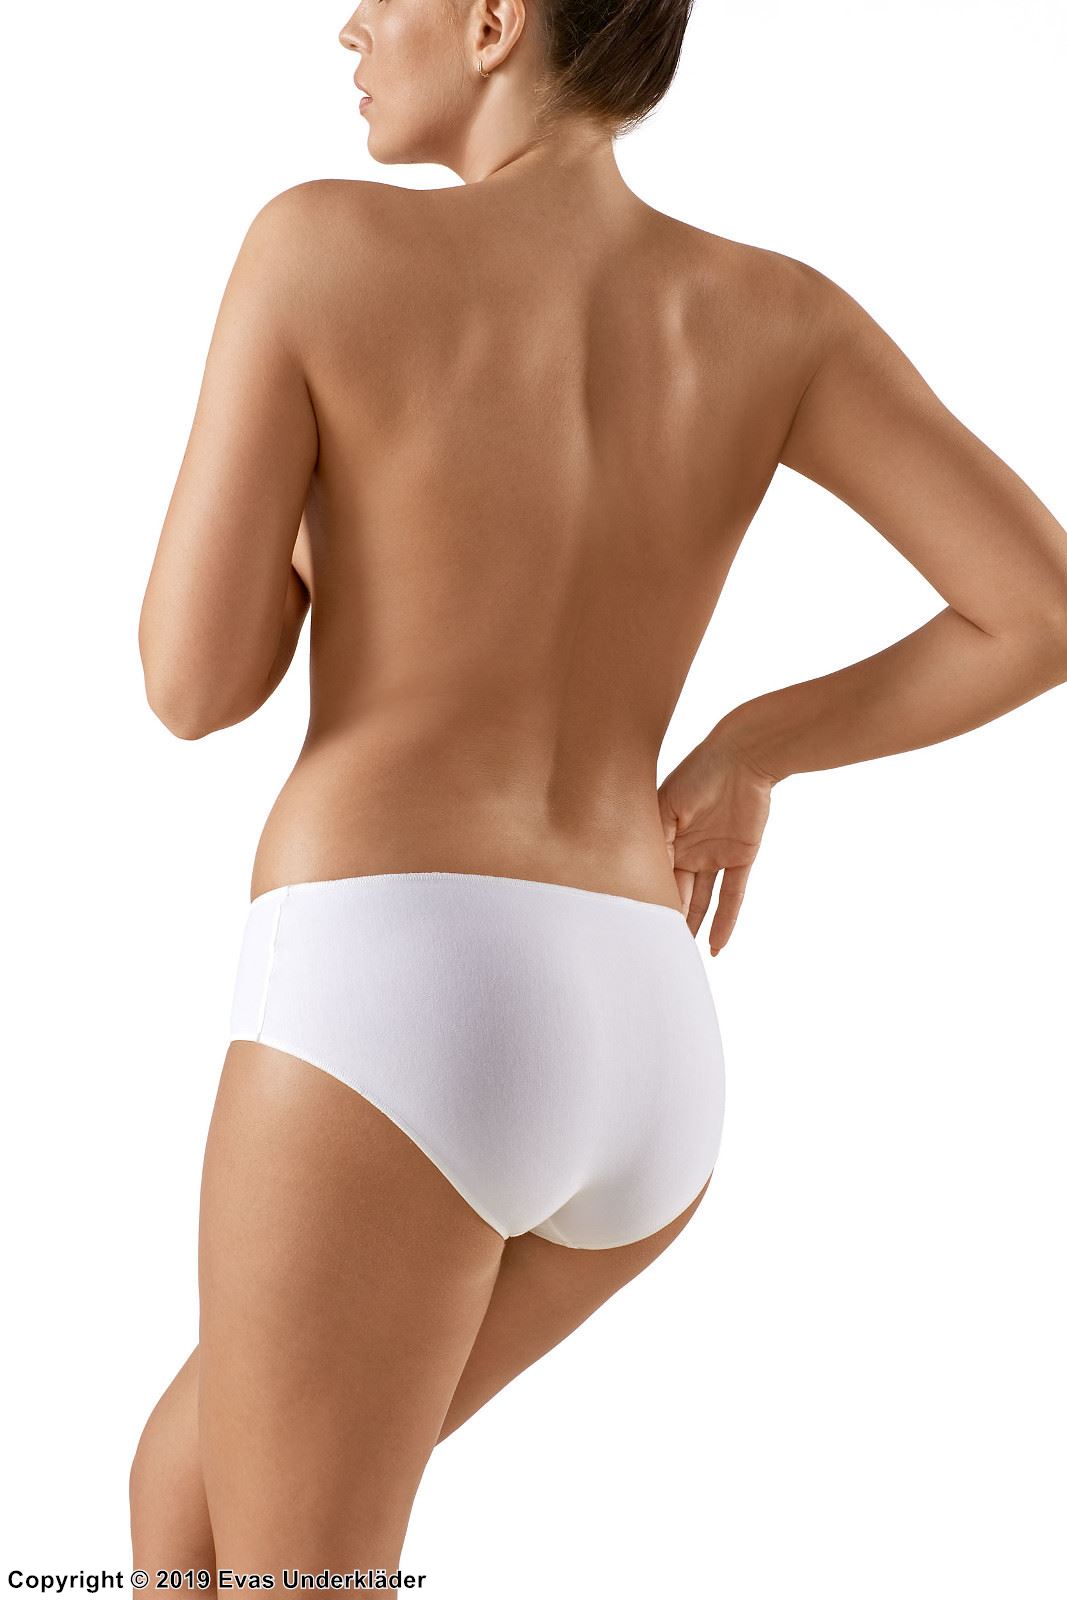 Comfortable briefs, high quality cotton